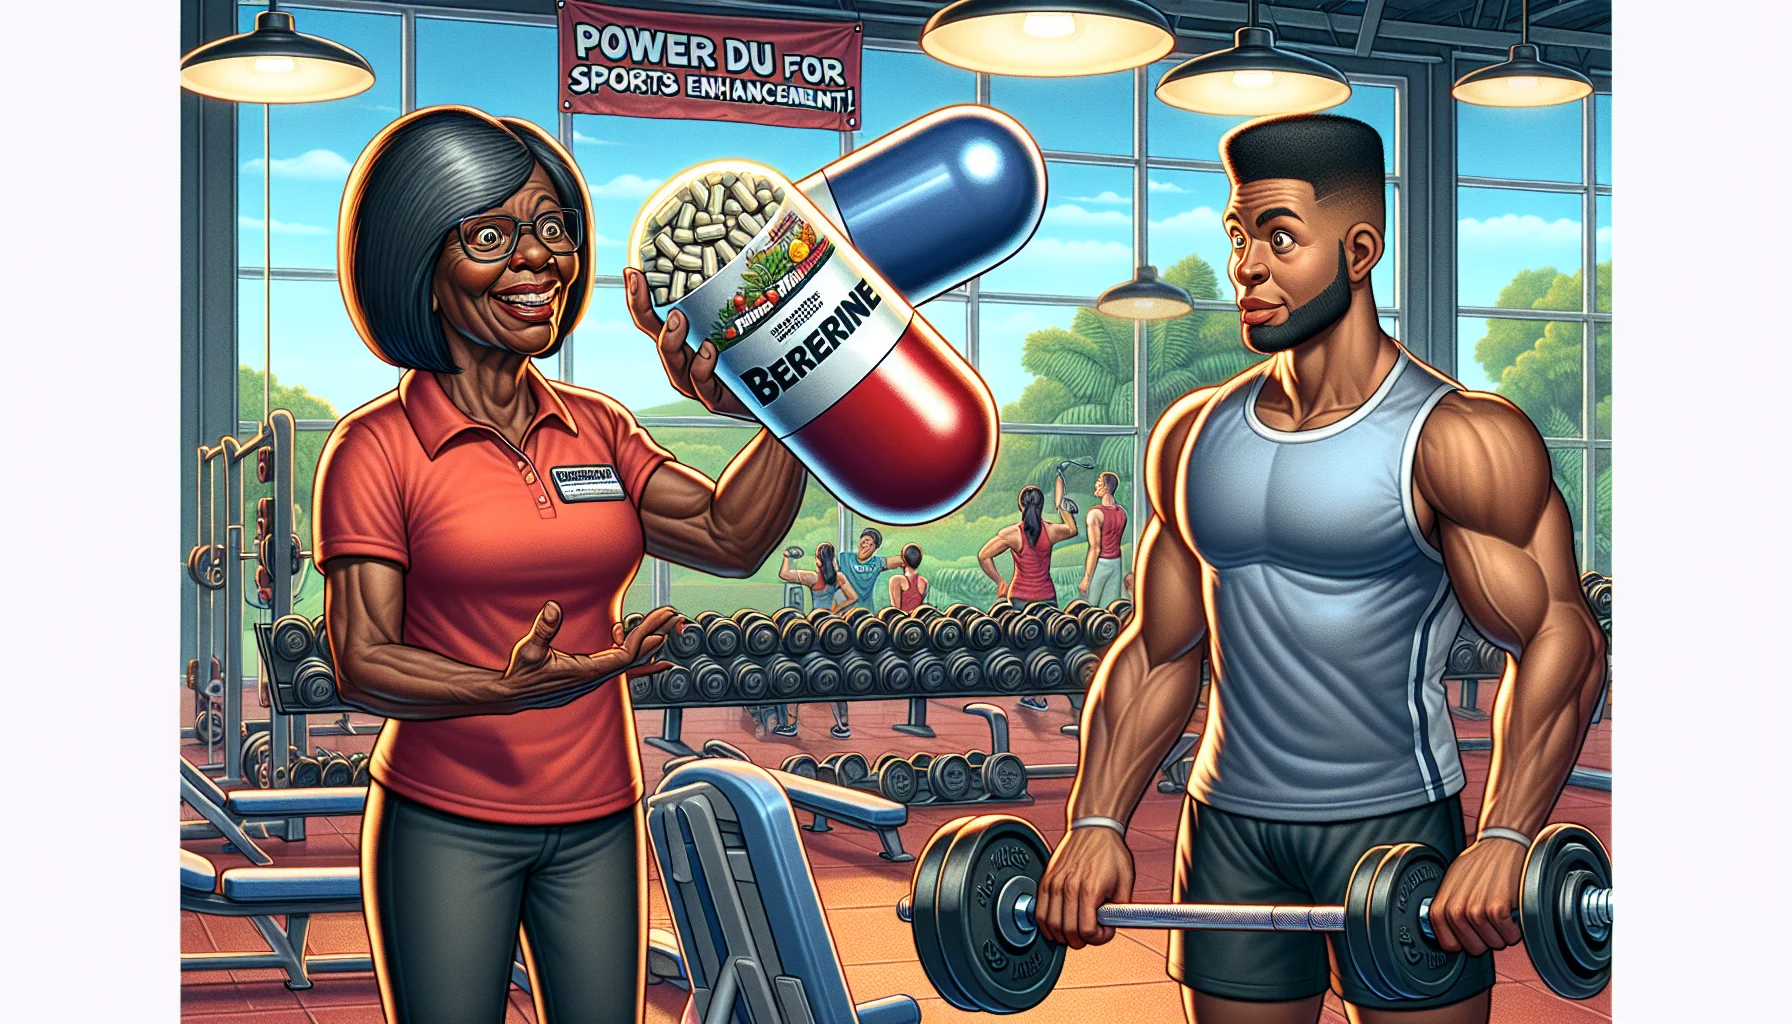 Create a humorous, realistic scene set in a gym. Picture an array of sports equipment in the background and a vibrant atmosphere. At the forefront, imagine a fitness trainer, a middle-aged Black woman, holding up two giant, cartoon-like capsules - one labeled with 'Berberine' and the other 'Magnesium'. Beside her, a young Hispanic male athlete is lifting weights, his face expressing surprise and amusement at the giant supplements. On a banner hanging overhead, read the phrase, 'Power Duo for Sports Enhancement!'. This illustration aims to promote the use of these supplements in a lighthearted and engaging manner.